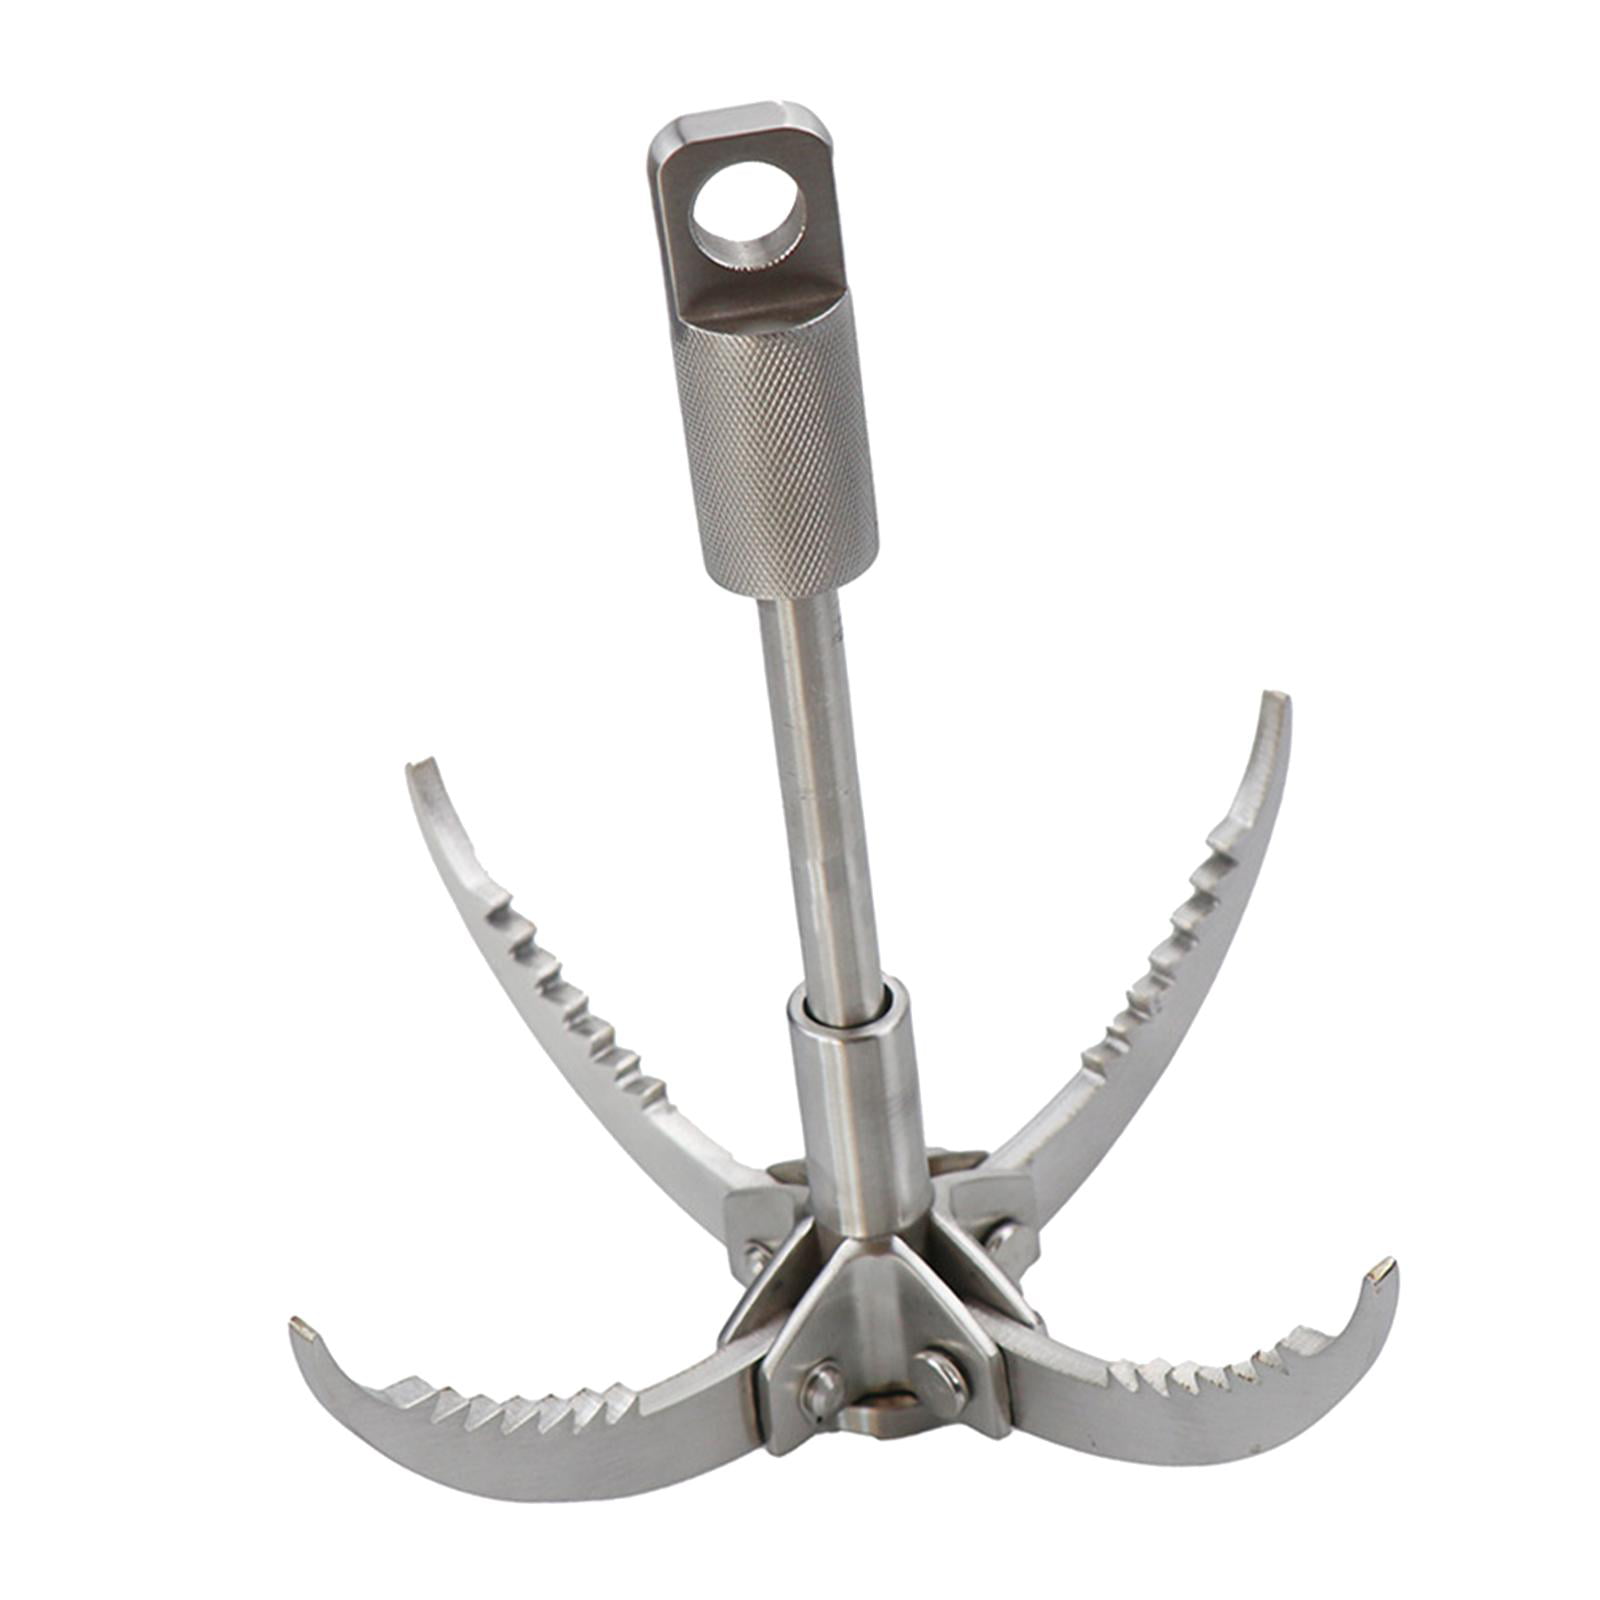 Large Grappling Hook, 4-Claw Folding Stainless Steel Grapple Hooks for  Outdoor Survival, Camping, Hiking, Tree &Mountain Climbing for Sale in  Concord, NC - OfferUp